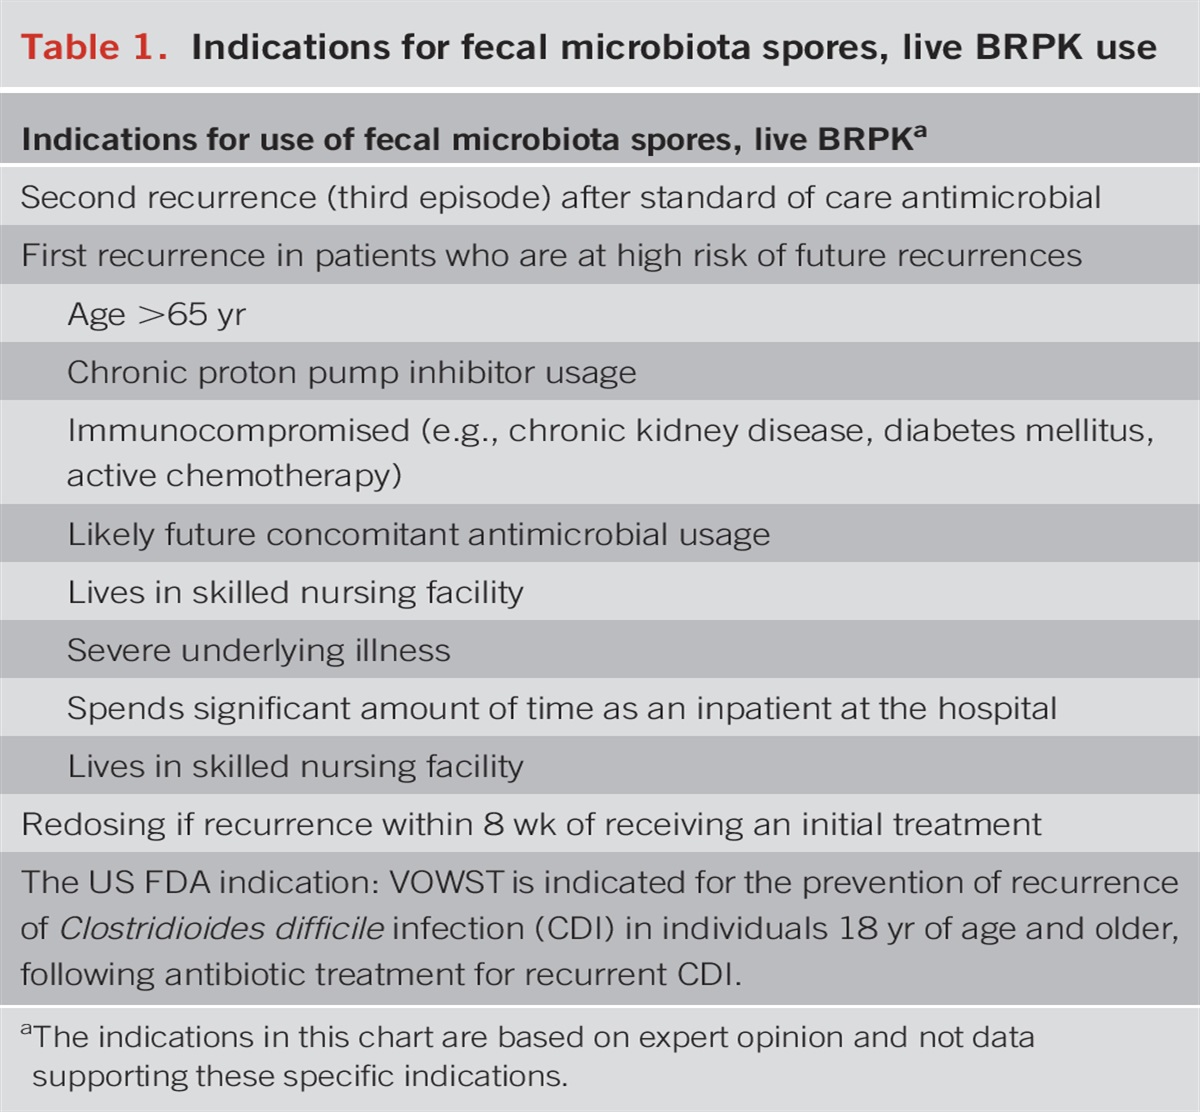 Practical Use of Fecal Microbiota Spores, Live BRPK for the Prevention of Recurrent Clostridioides difficile Infection